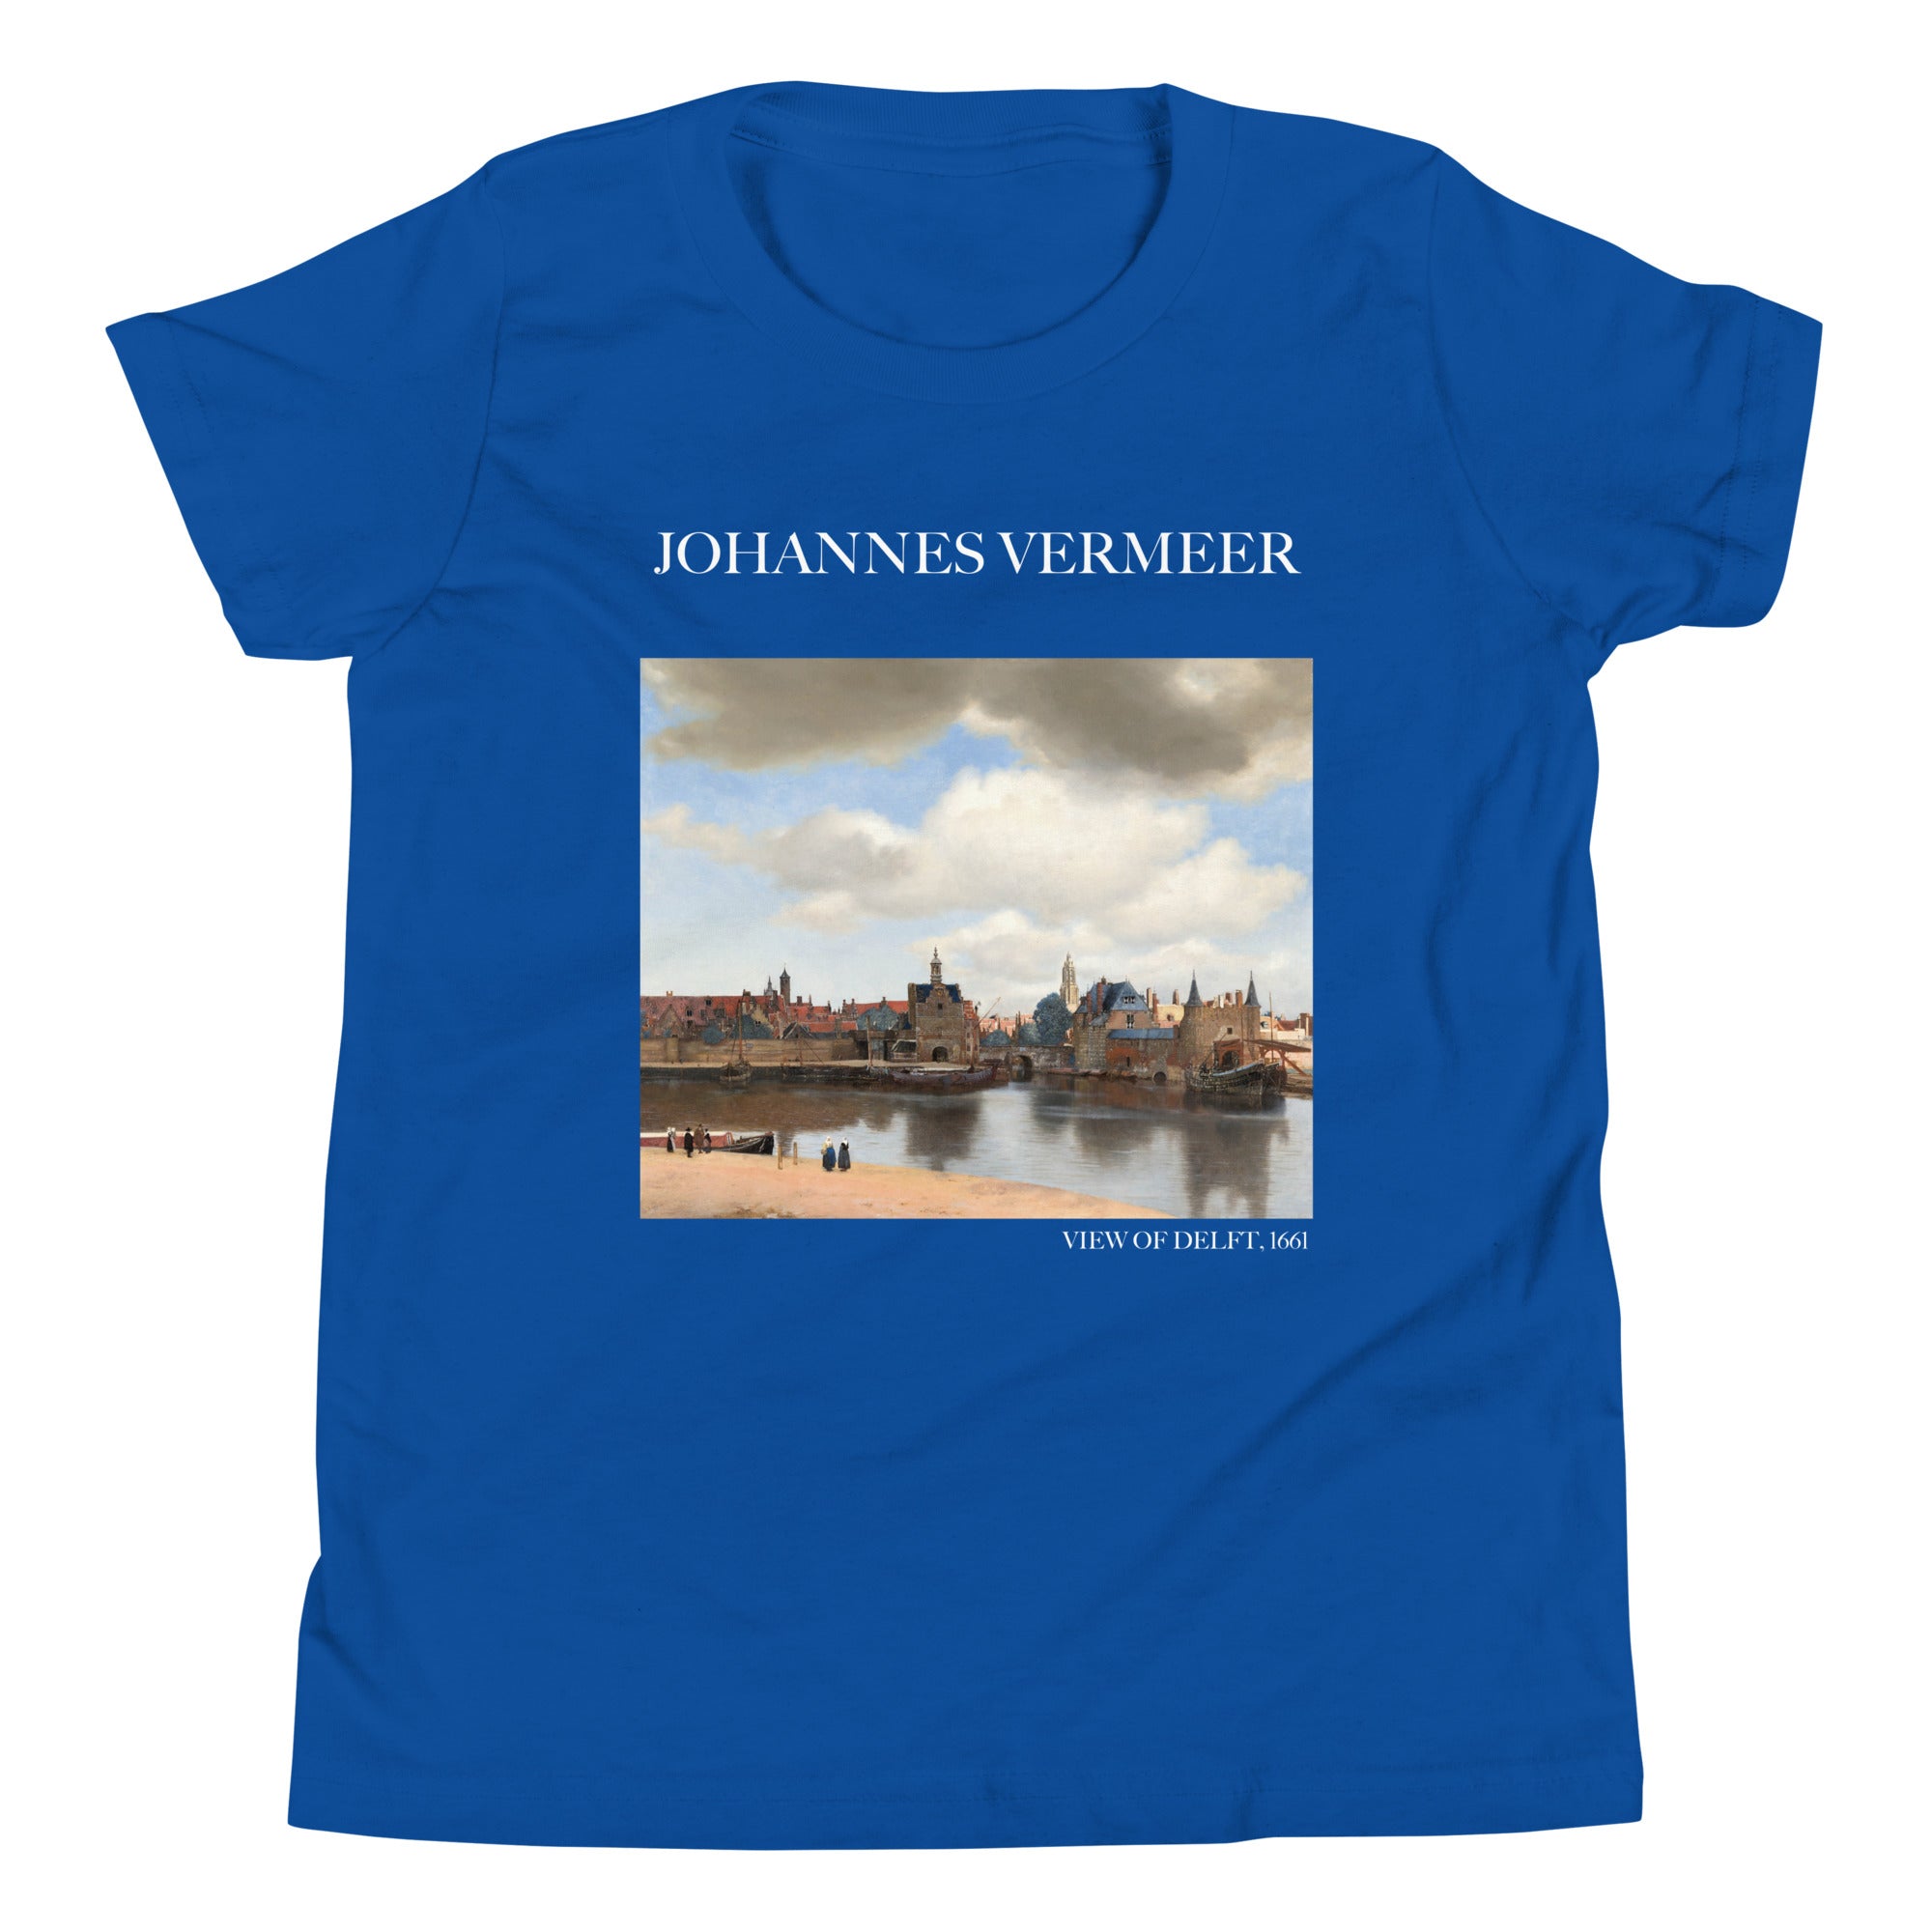 Johannes Vermeer 'View of Delft' Famous Painting Short Sleeve T-Shirt | Premium Youth Art Tee